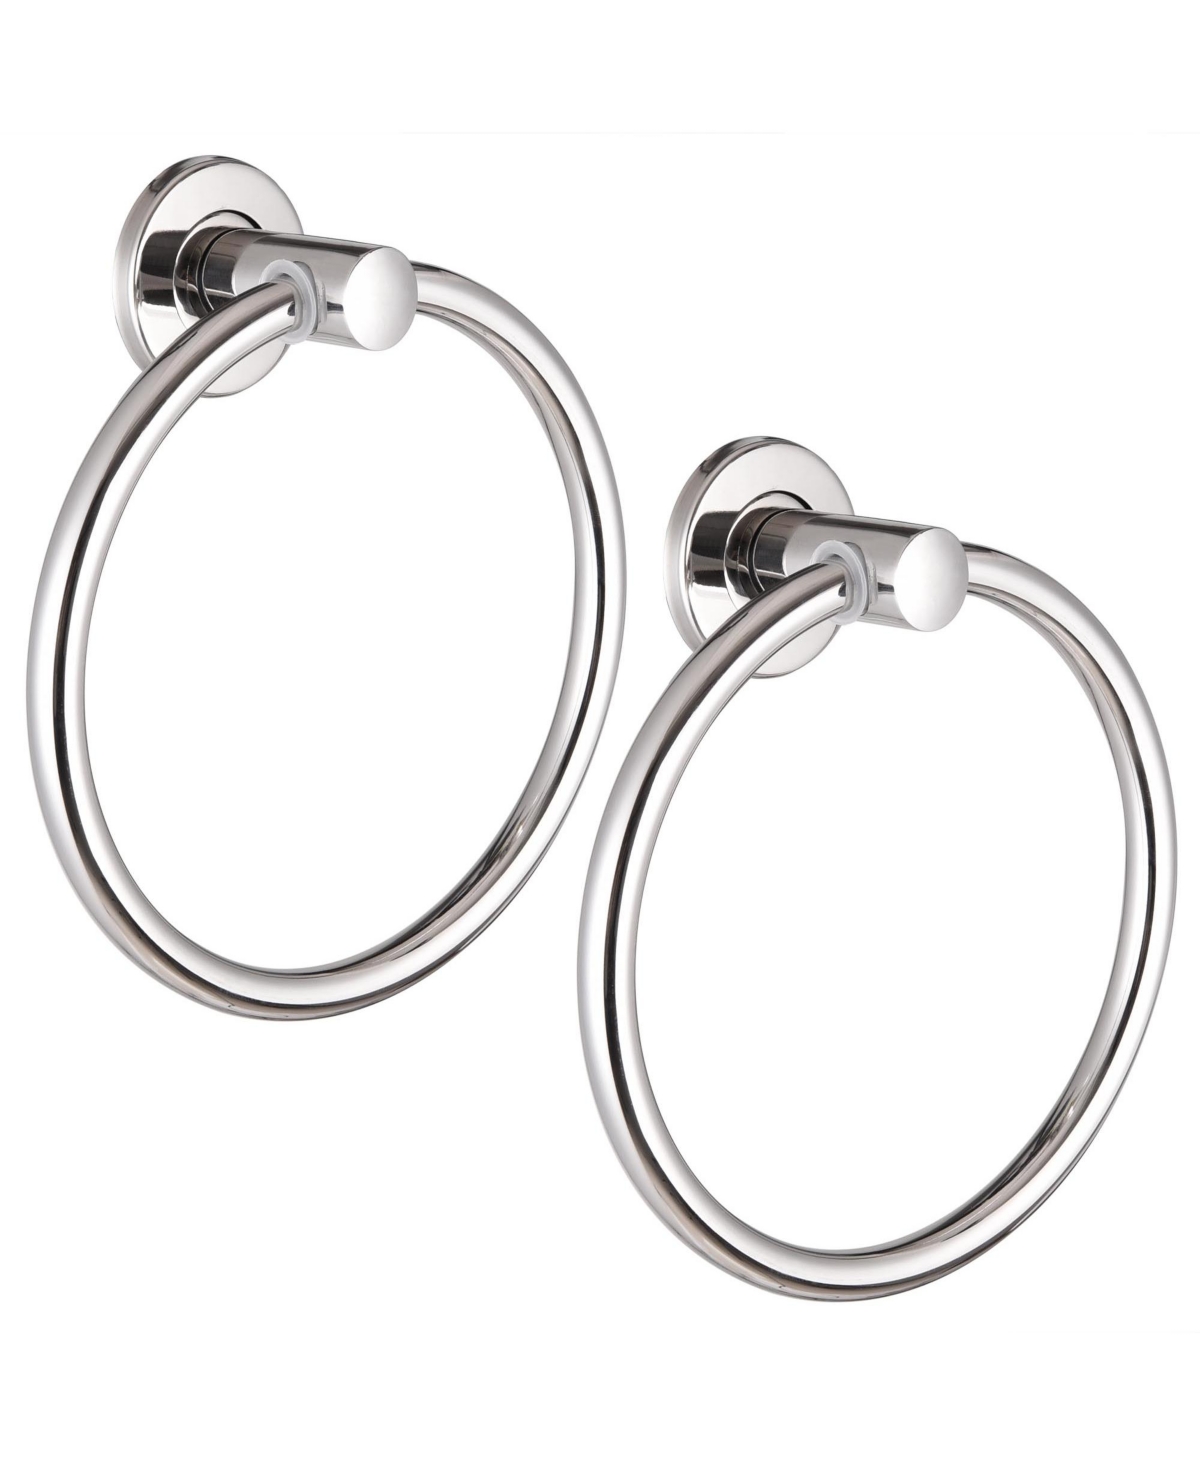 2 Pack Stainless Steel Towel Ring Holder Hanger Chrome Wall-Mounted Bathroom - Silver